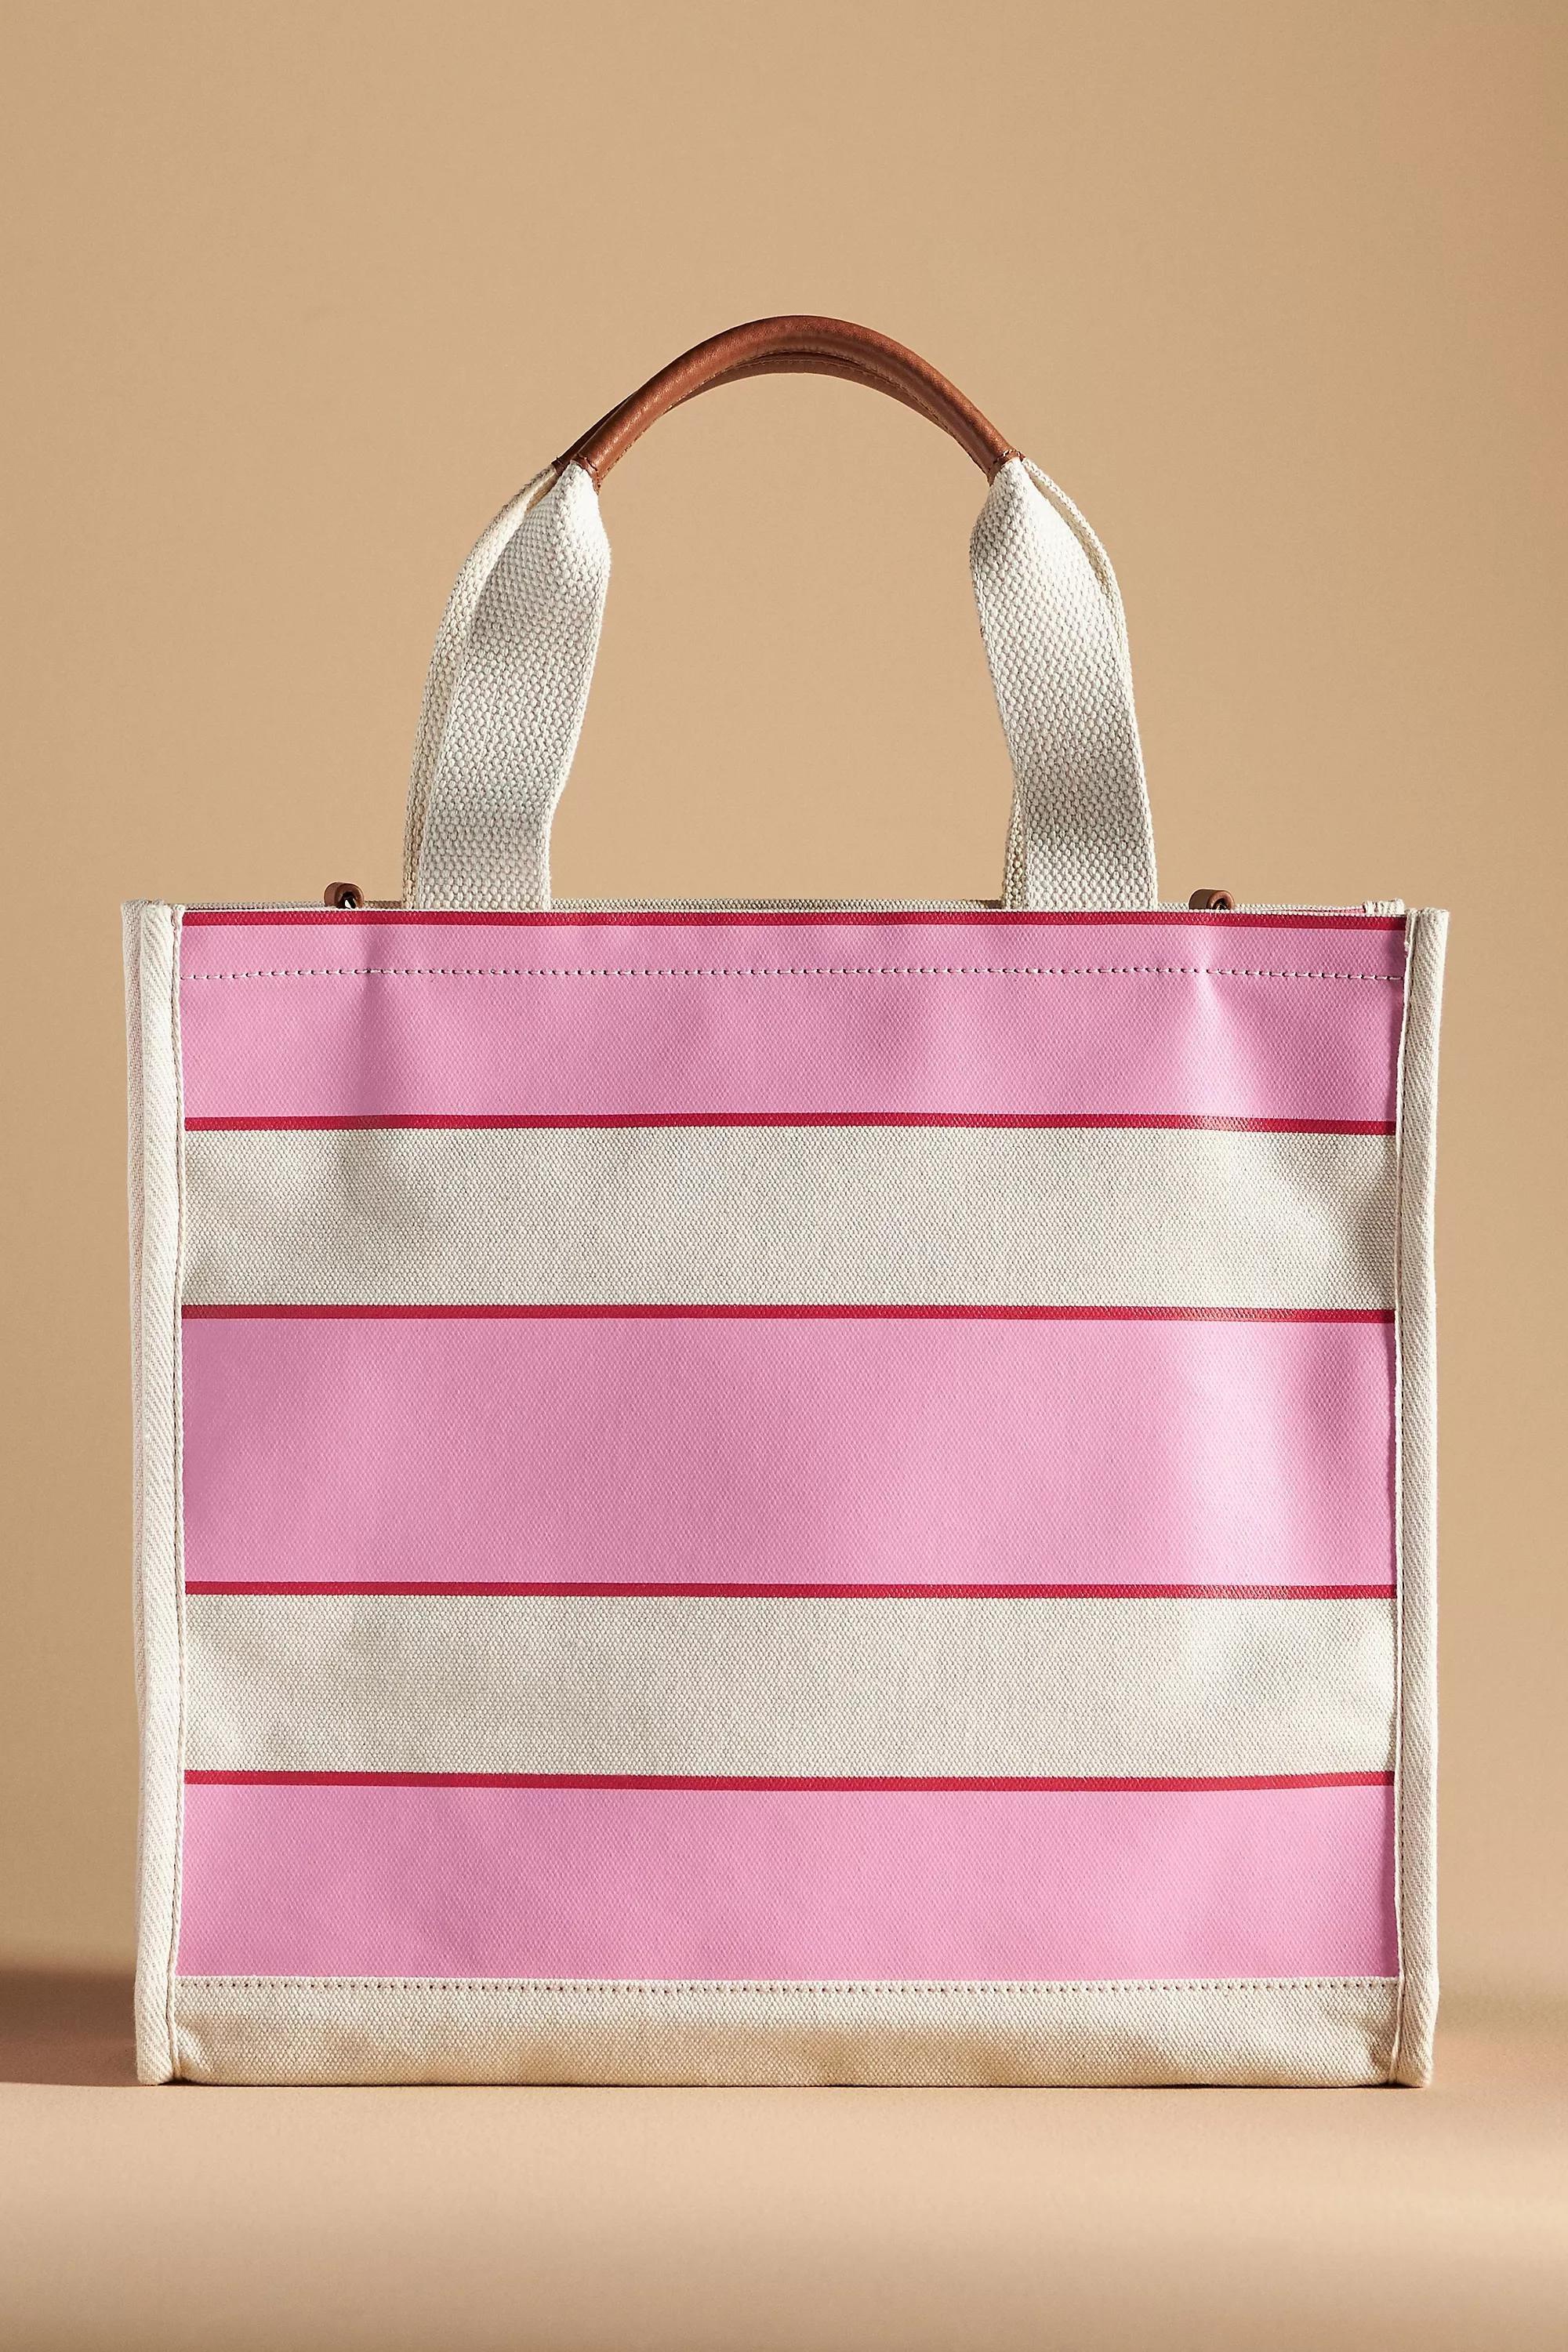 Anthropologie - Pink Striped Canvas Mini Tote Bag